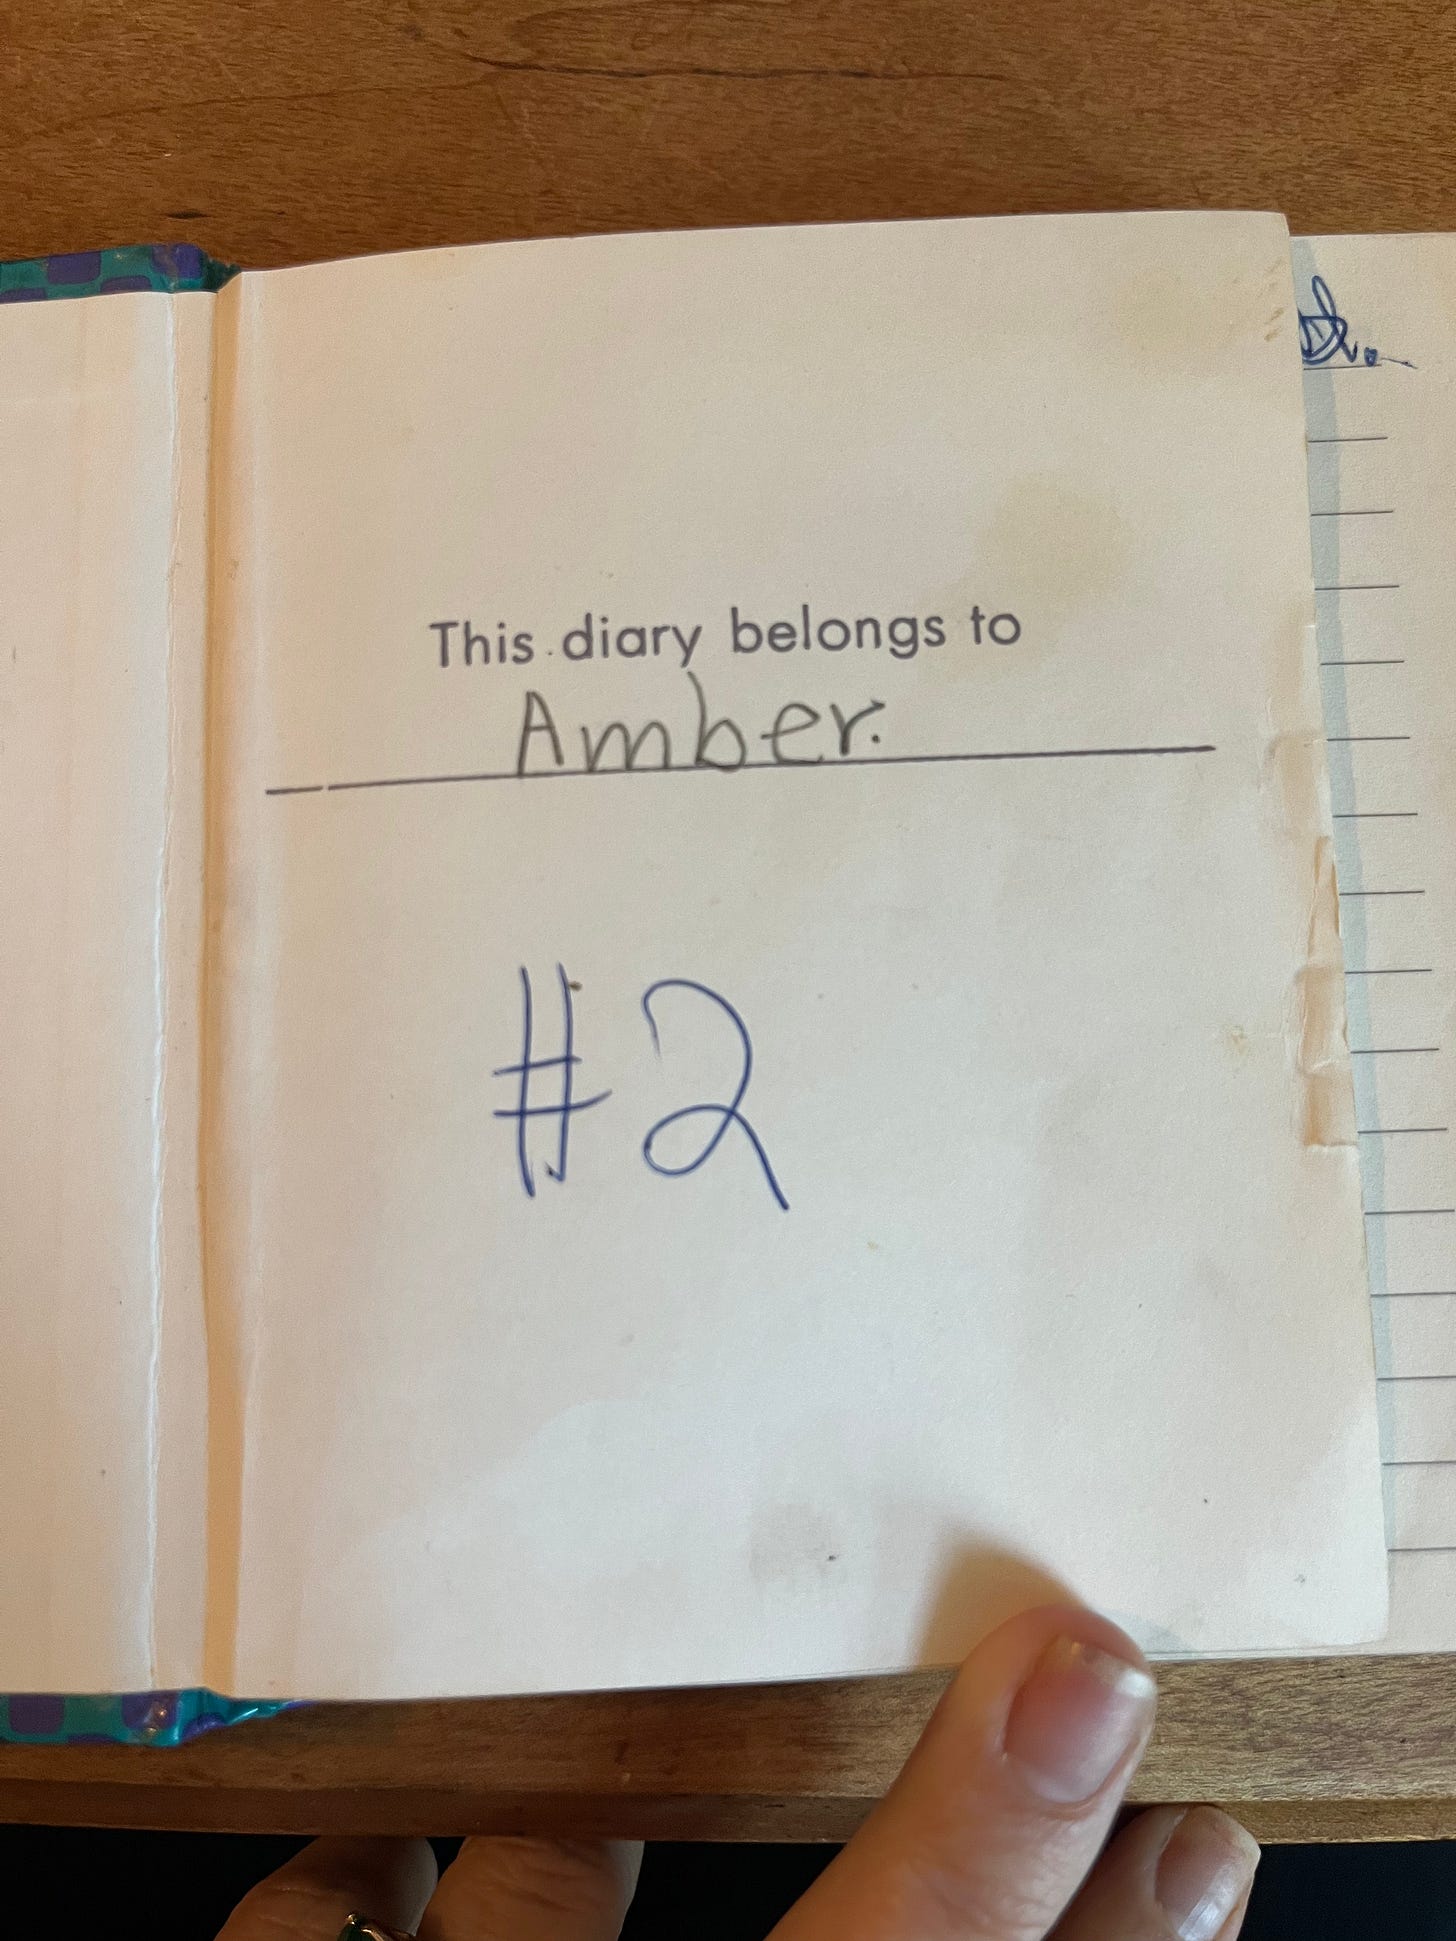 The first interior page of the diary. Text reads: "This diary belongs to Amber" Below that is "#2" written in pen. 